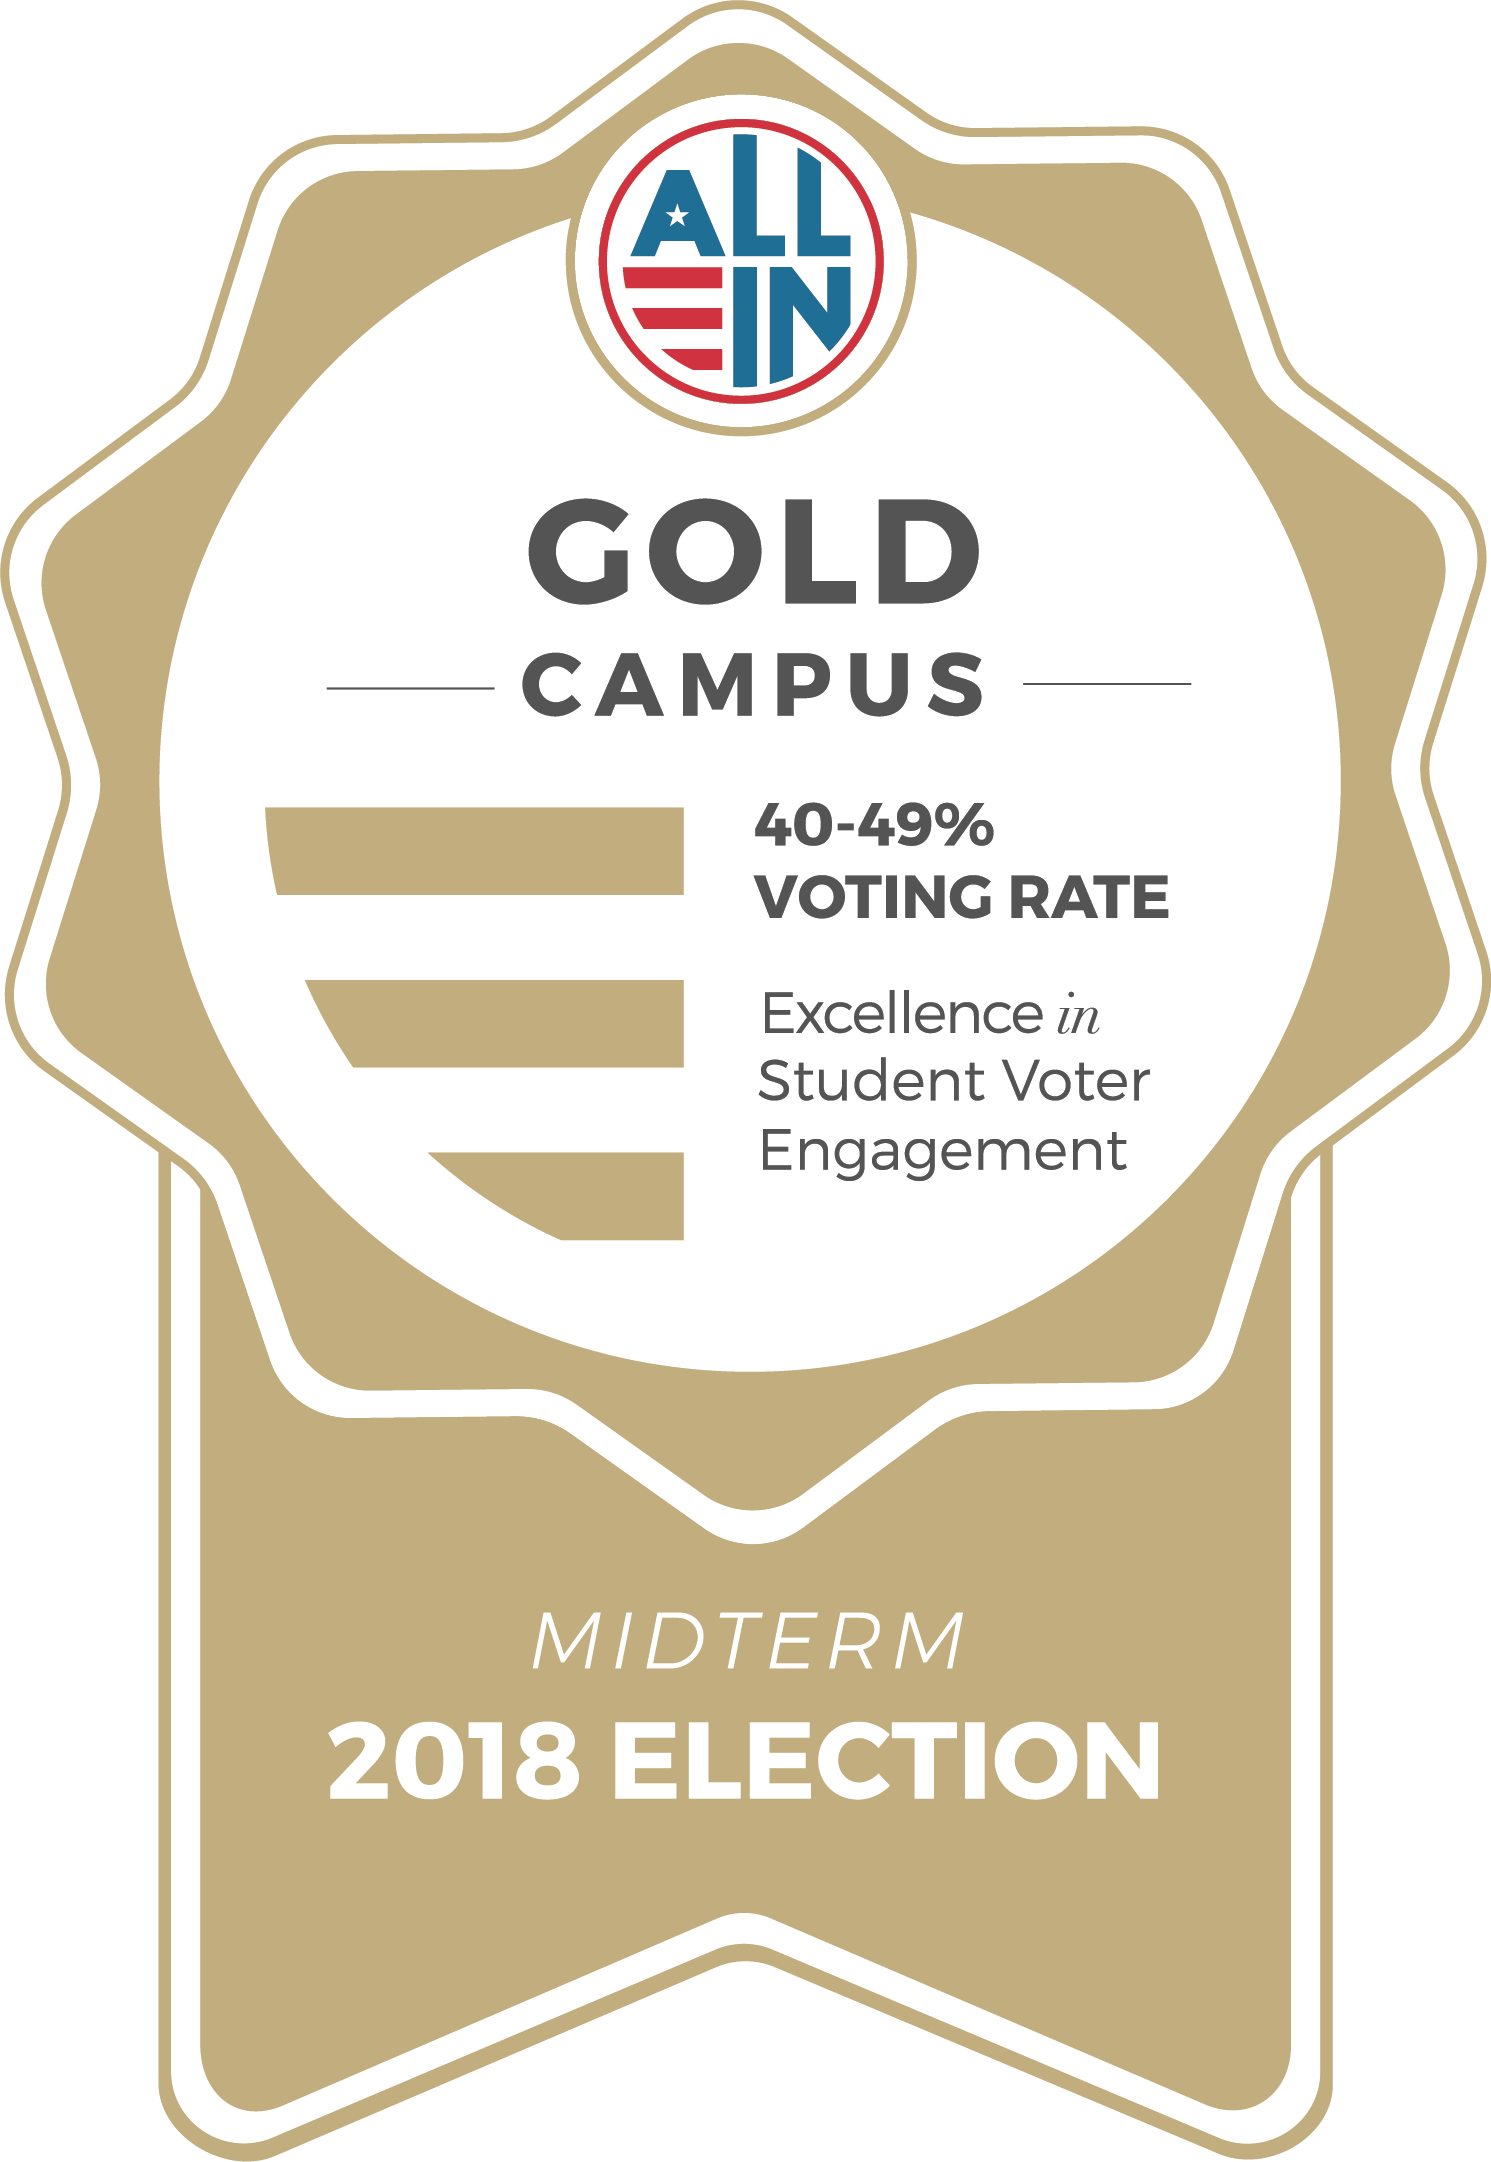 All In Gold Seal for Excellence in Student Voter Engagement 2018 Midterm Election